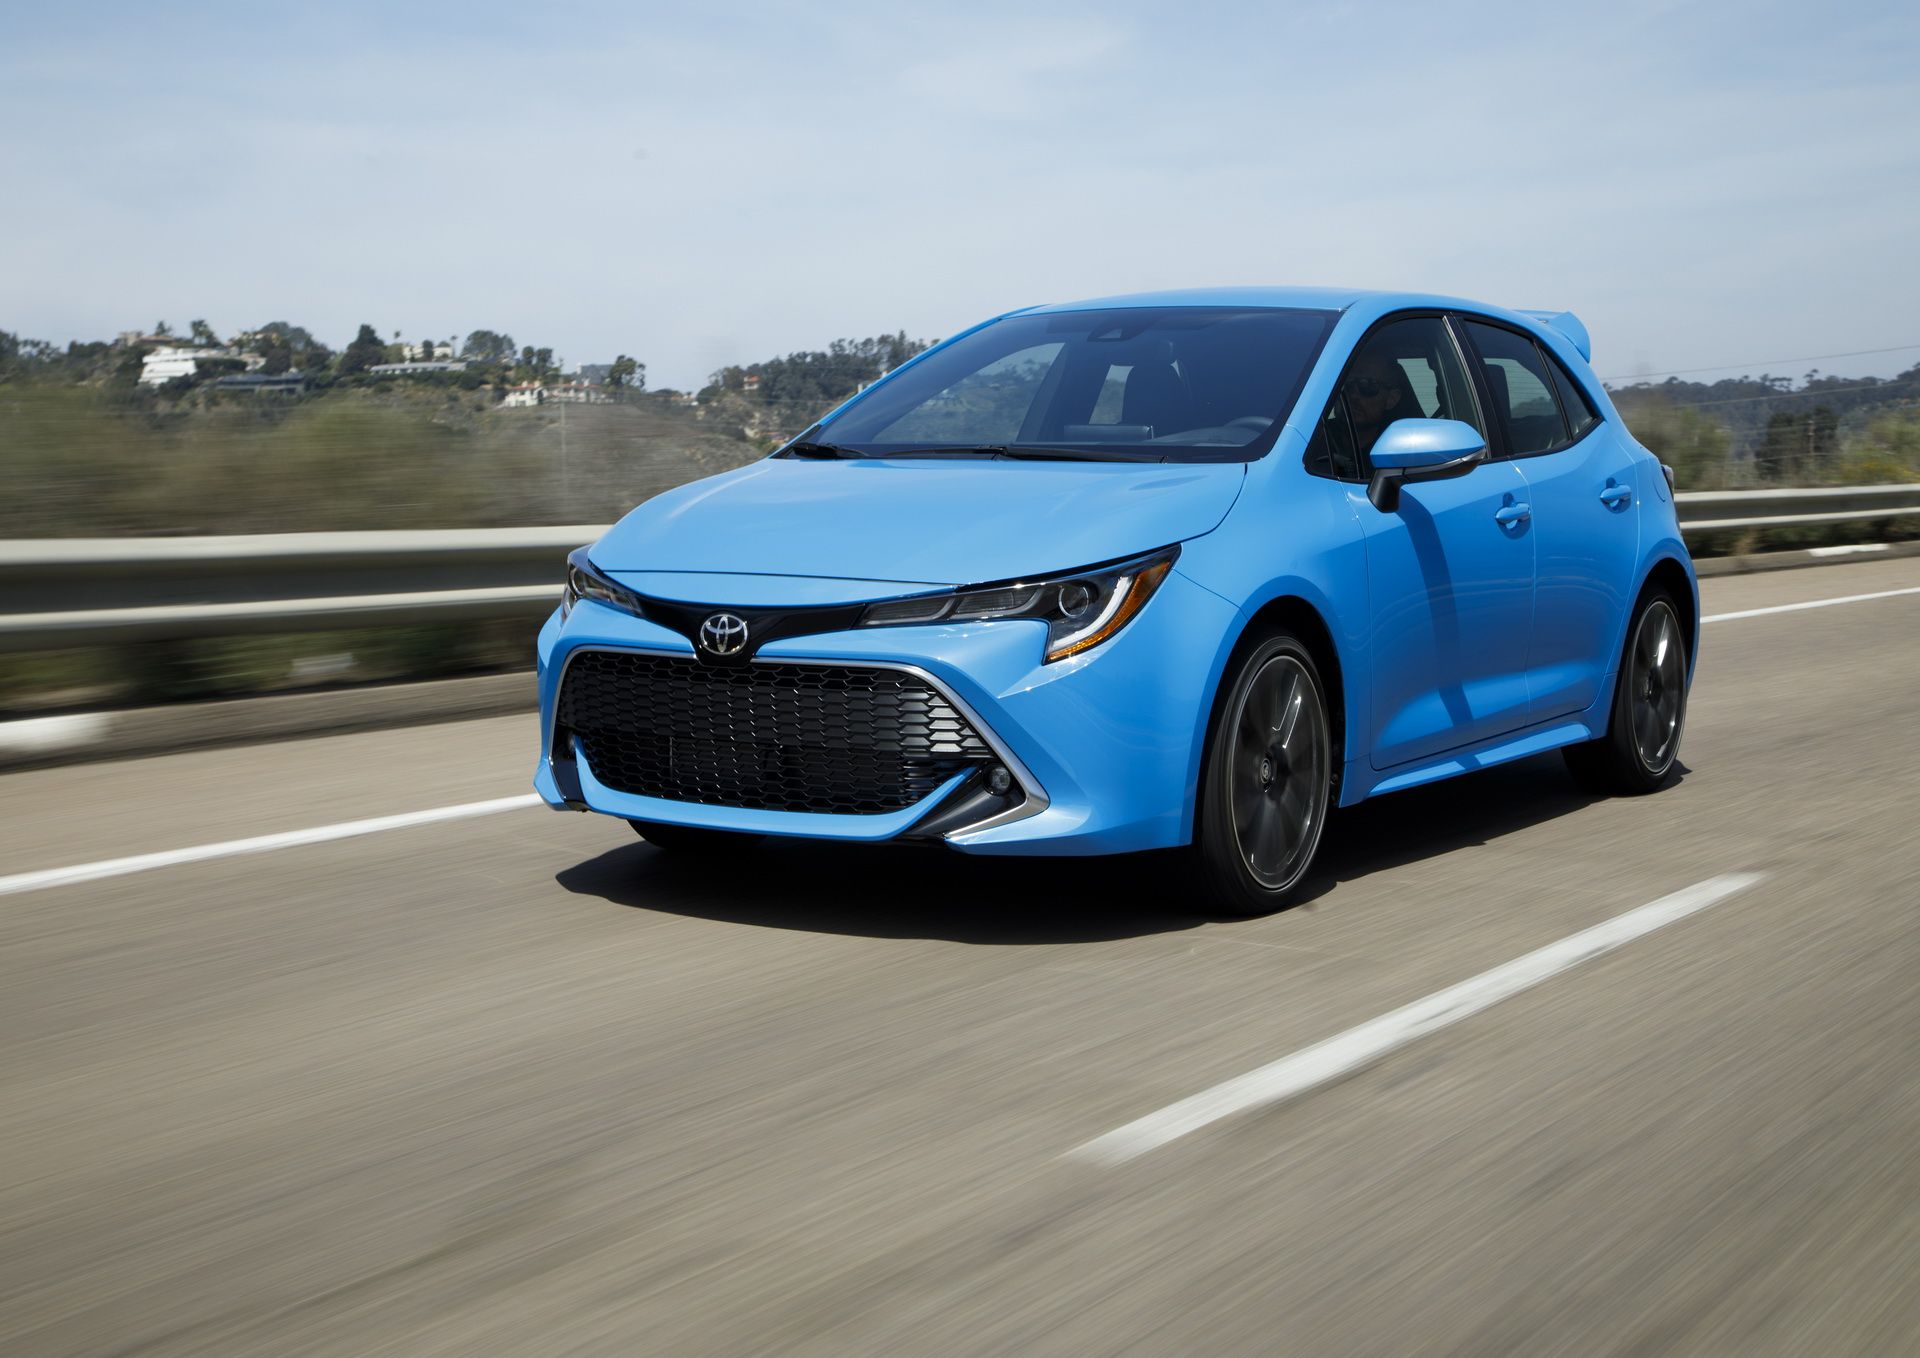 Toyota Expected To Debut New Corolla Sedan For 2020 Model Year - autoevolution